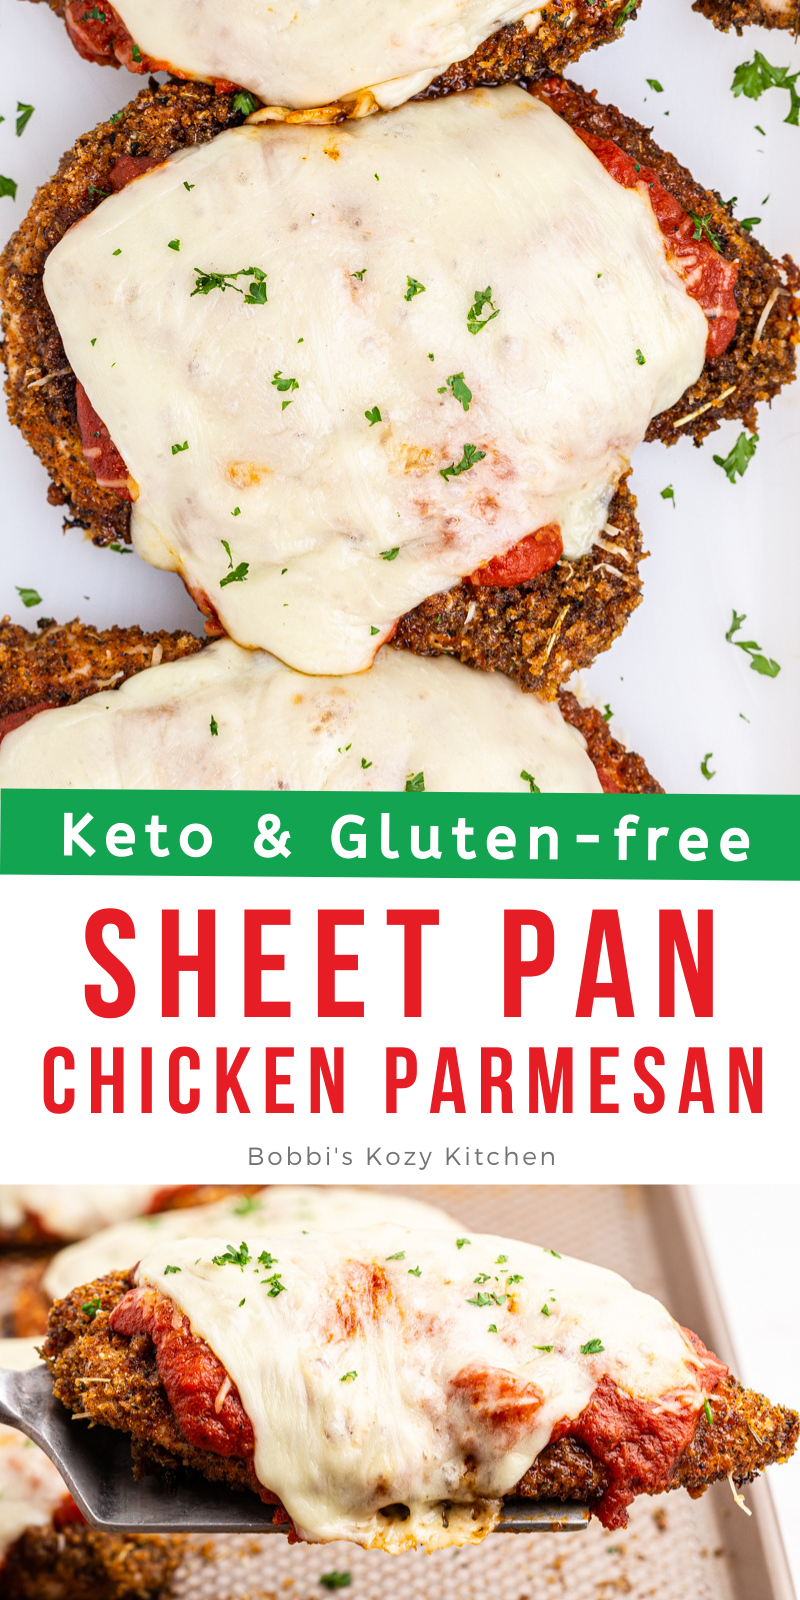 Keto Sheet Pan Chicken Parmesan - Crispy chicken topped with marinara sauce and cheese, all baked to perfection, no one will be able to tell it is low carb and gluten-free! #keto #lowcarb #glutenfree #Italian #chicken #parmesan #chickenparm #sheetpan #recipe